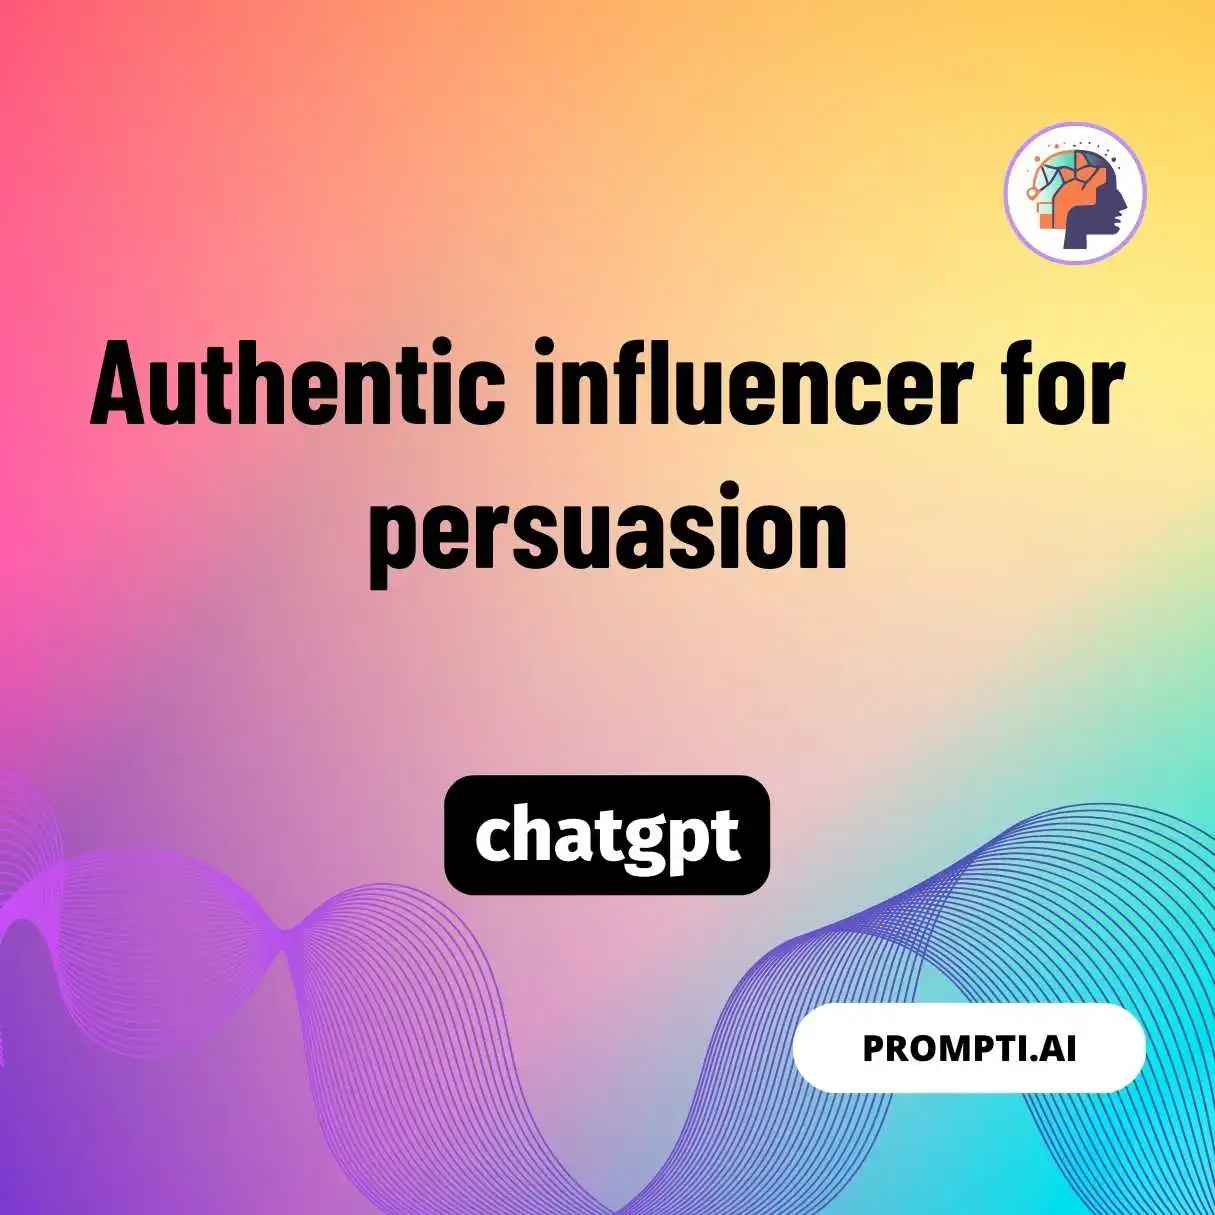 Authentic influencer for persuasion